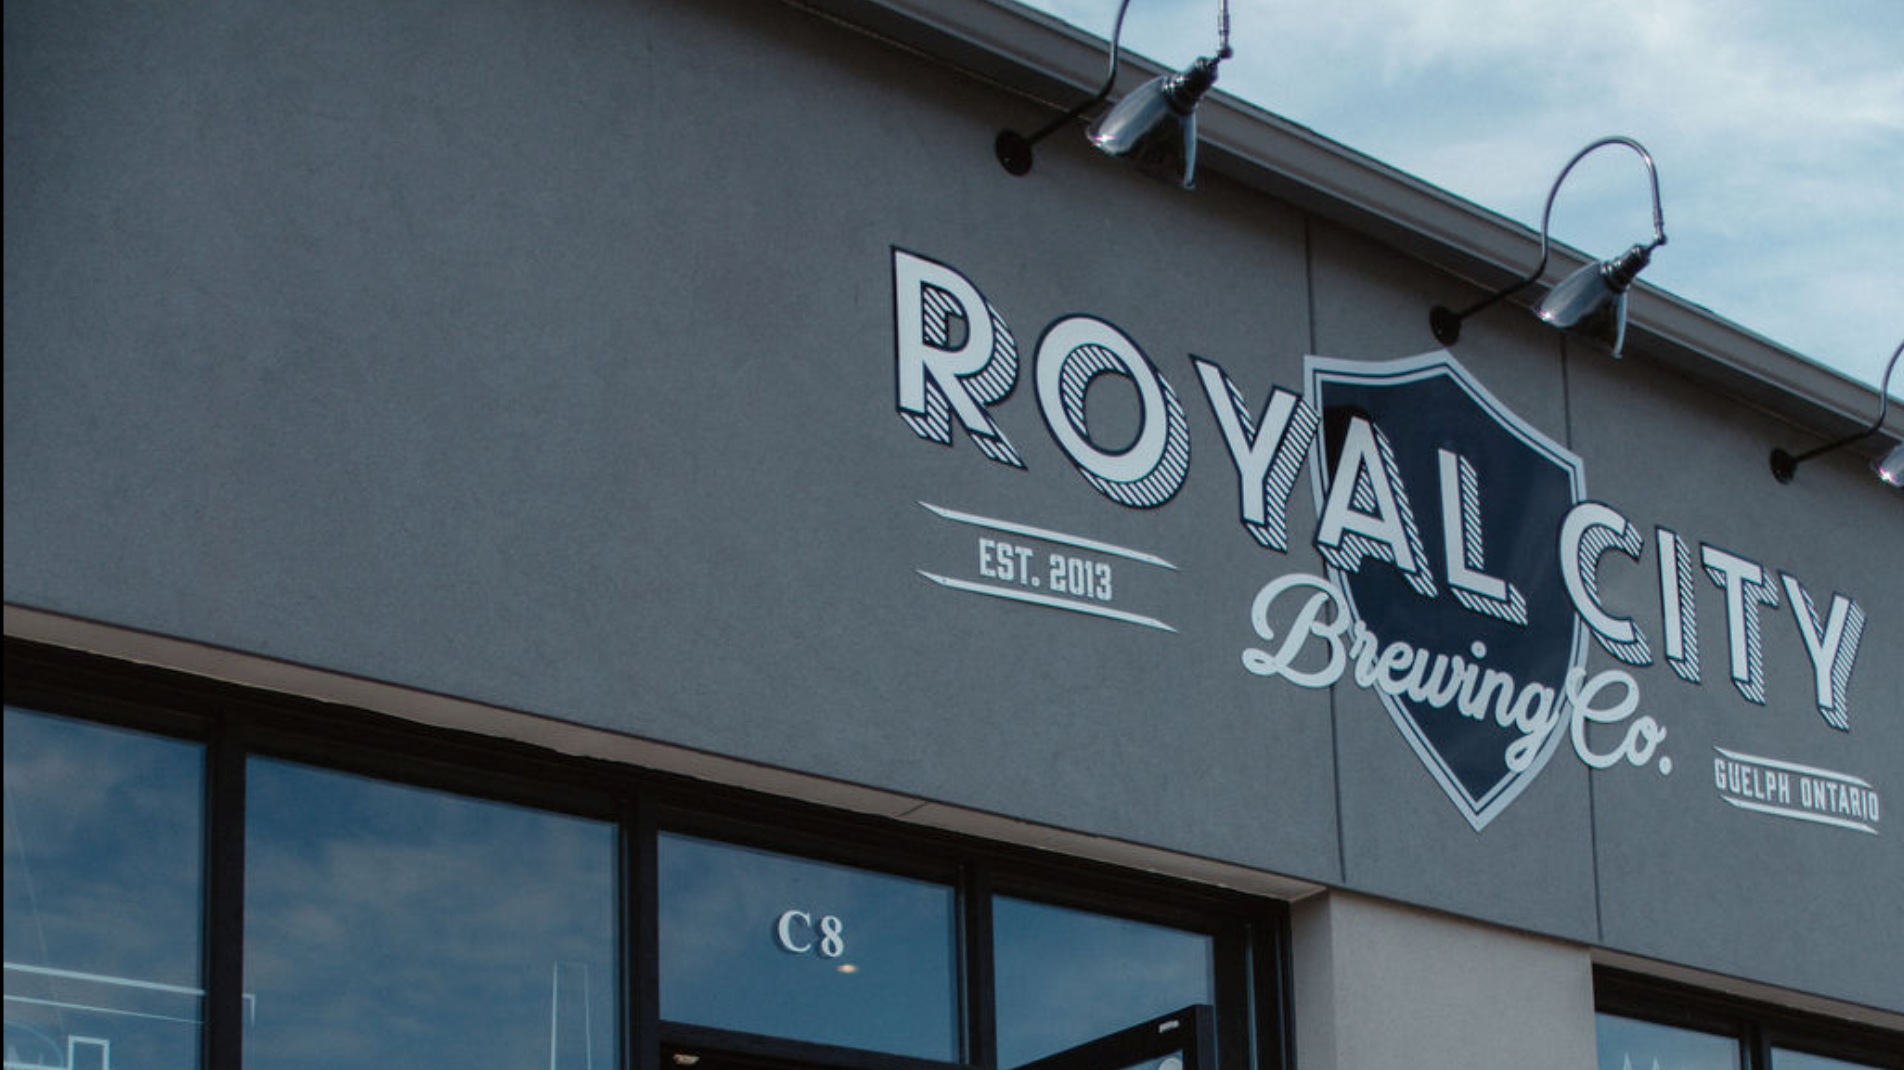 After Hours Pickup at Royal City Brewing